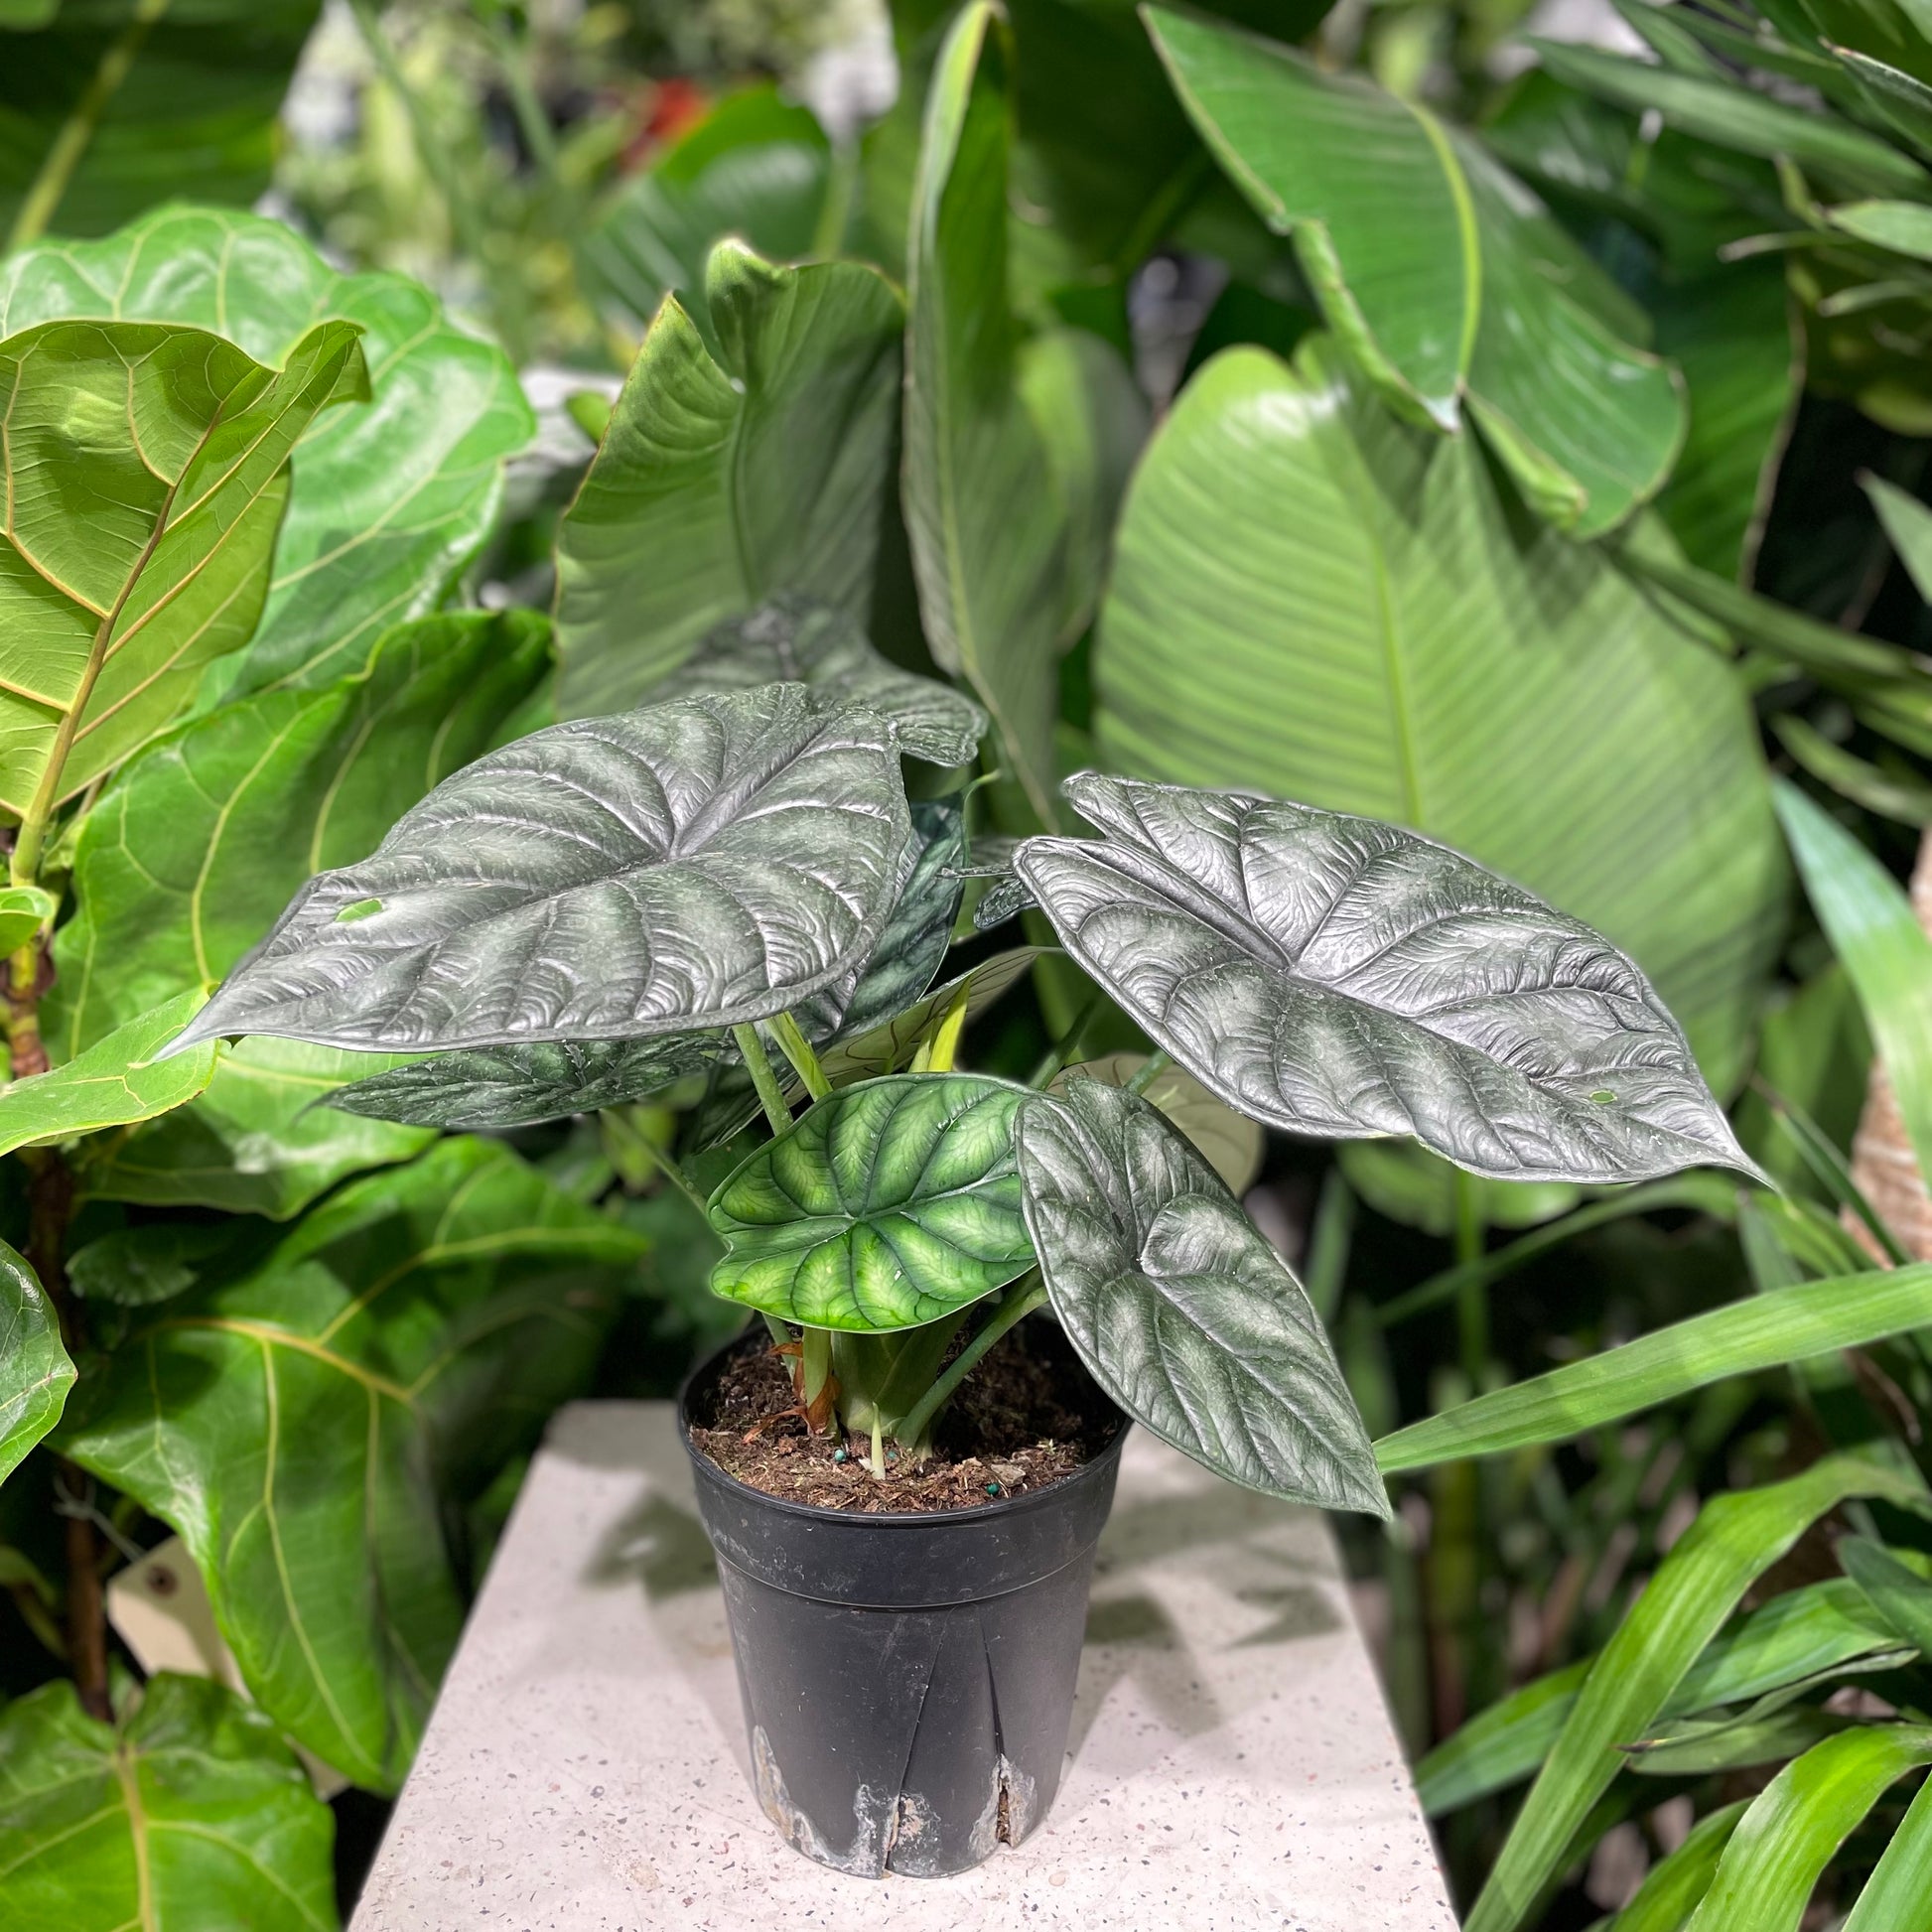 Emerald Dragon Scale, Bisma, Elephant Ear, Taro (Alocasia bisma) in a 6 inch pot. Indoor plant for sale by Promise Supply for delivery and pickup in Toronto